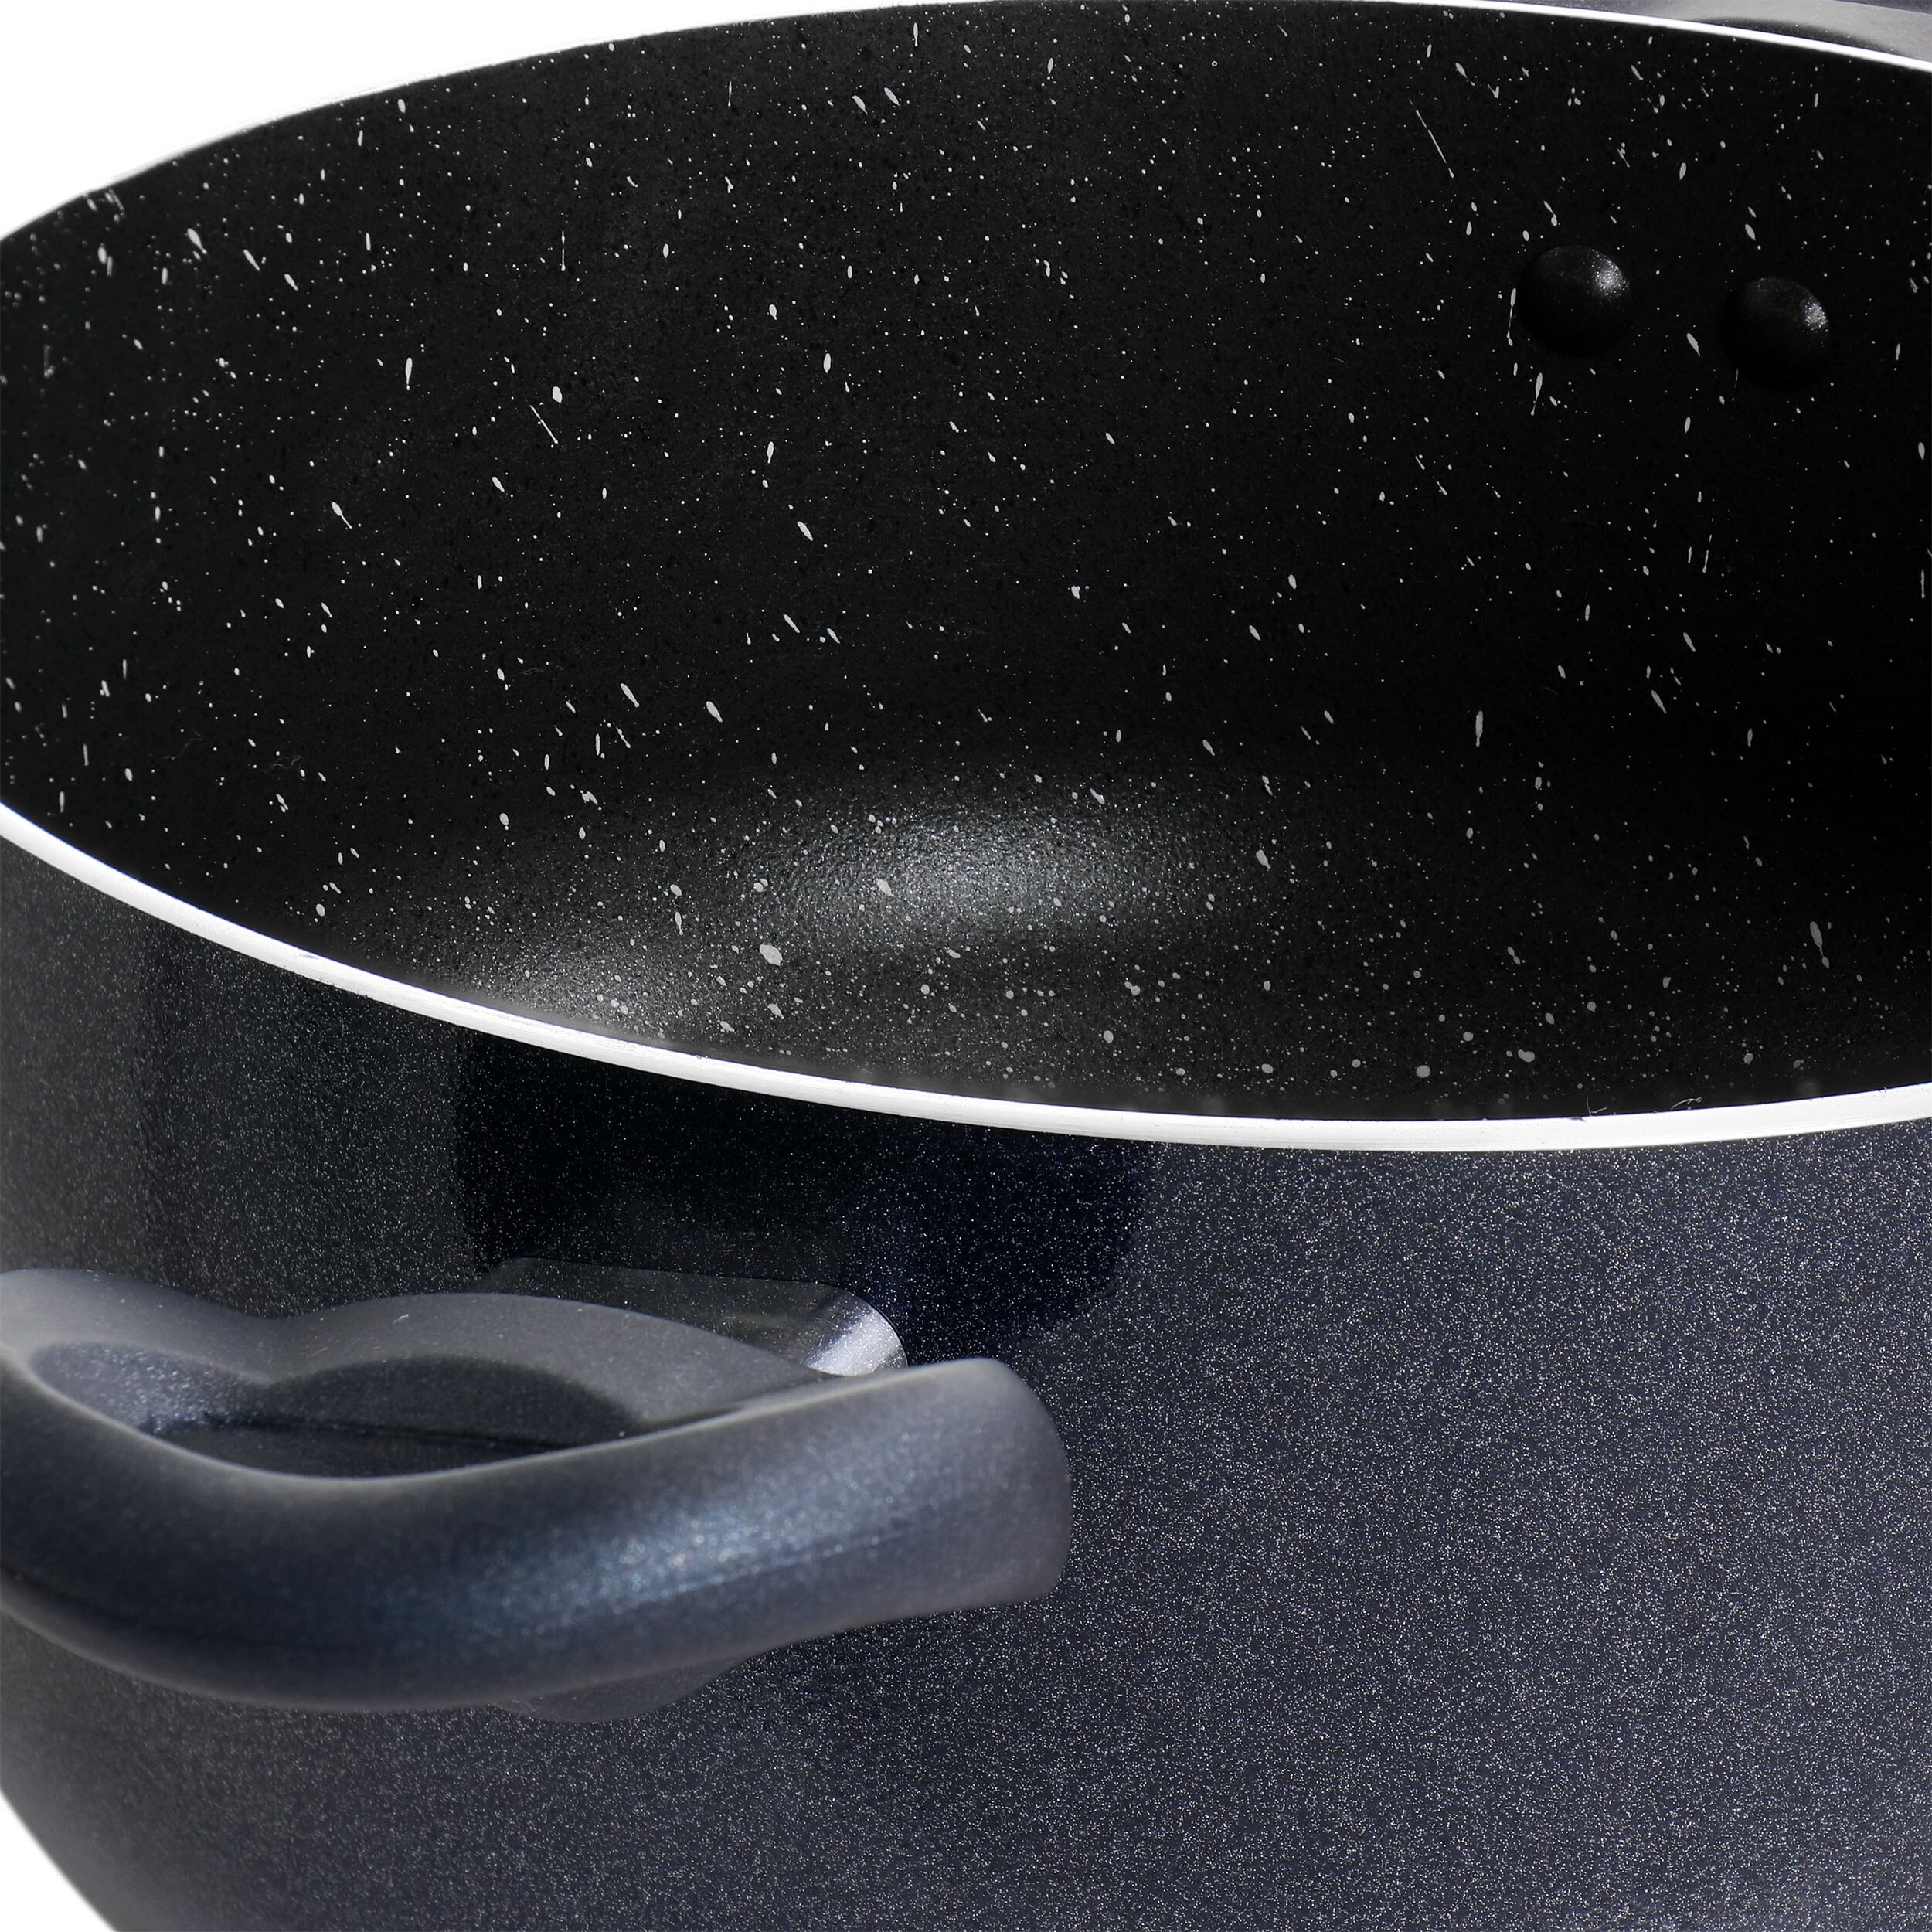 https://ak1.ostkcdn.com/images/products/is/images/direct/ed7ec7d540f87b93007c7cde7fbbbb8fb2749cad/Oster-Anetta-5-Quart-Nonstick-Dutch-Oven-with-Lid-in-Navy-Blue.jpg